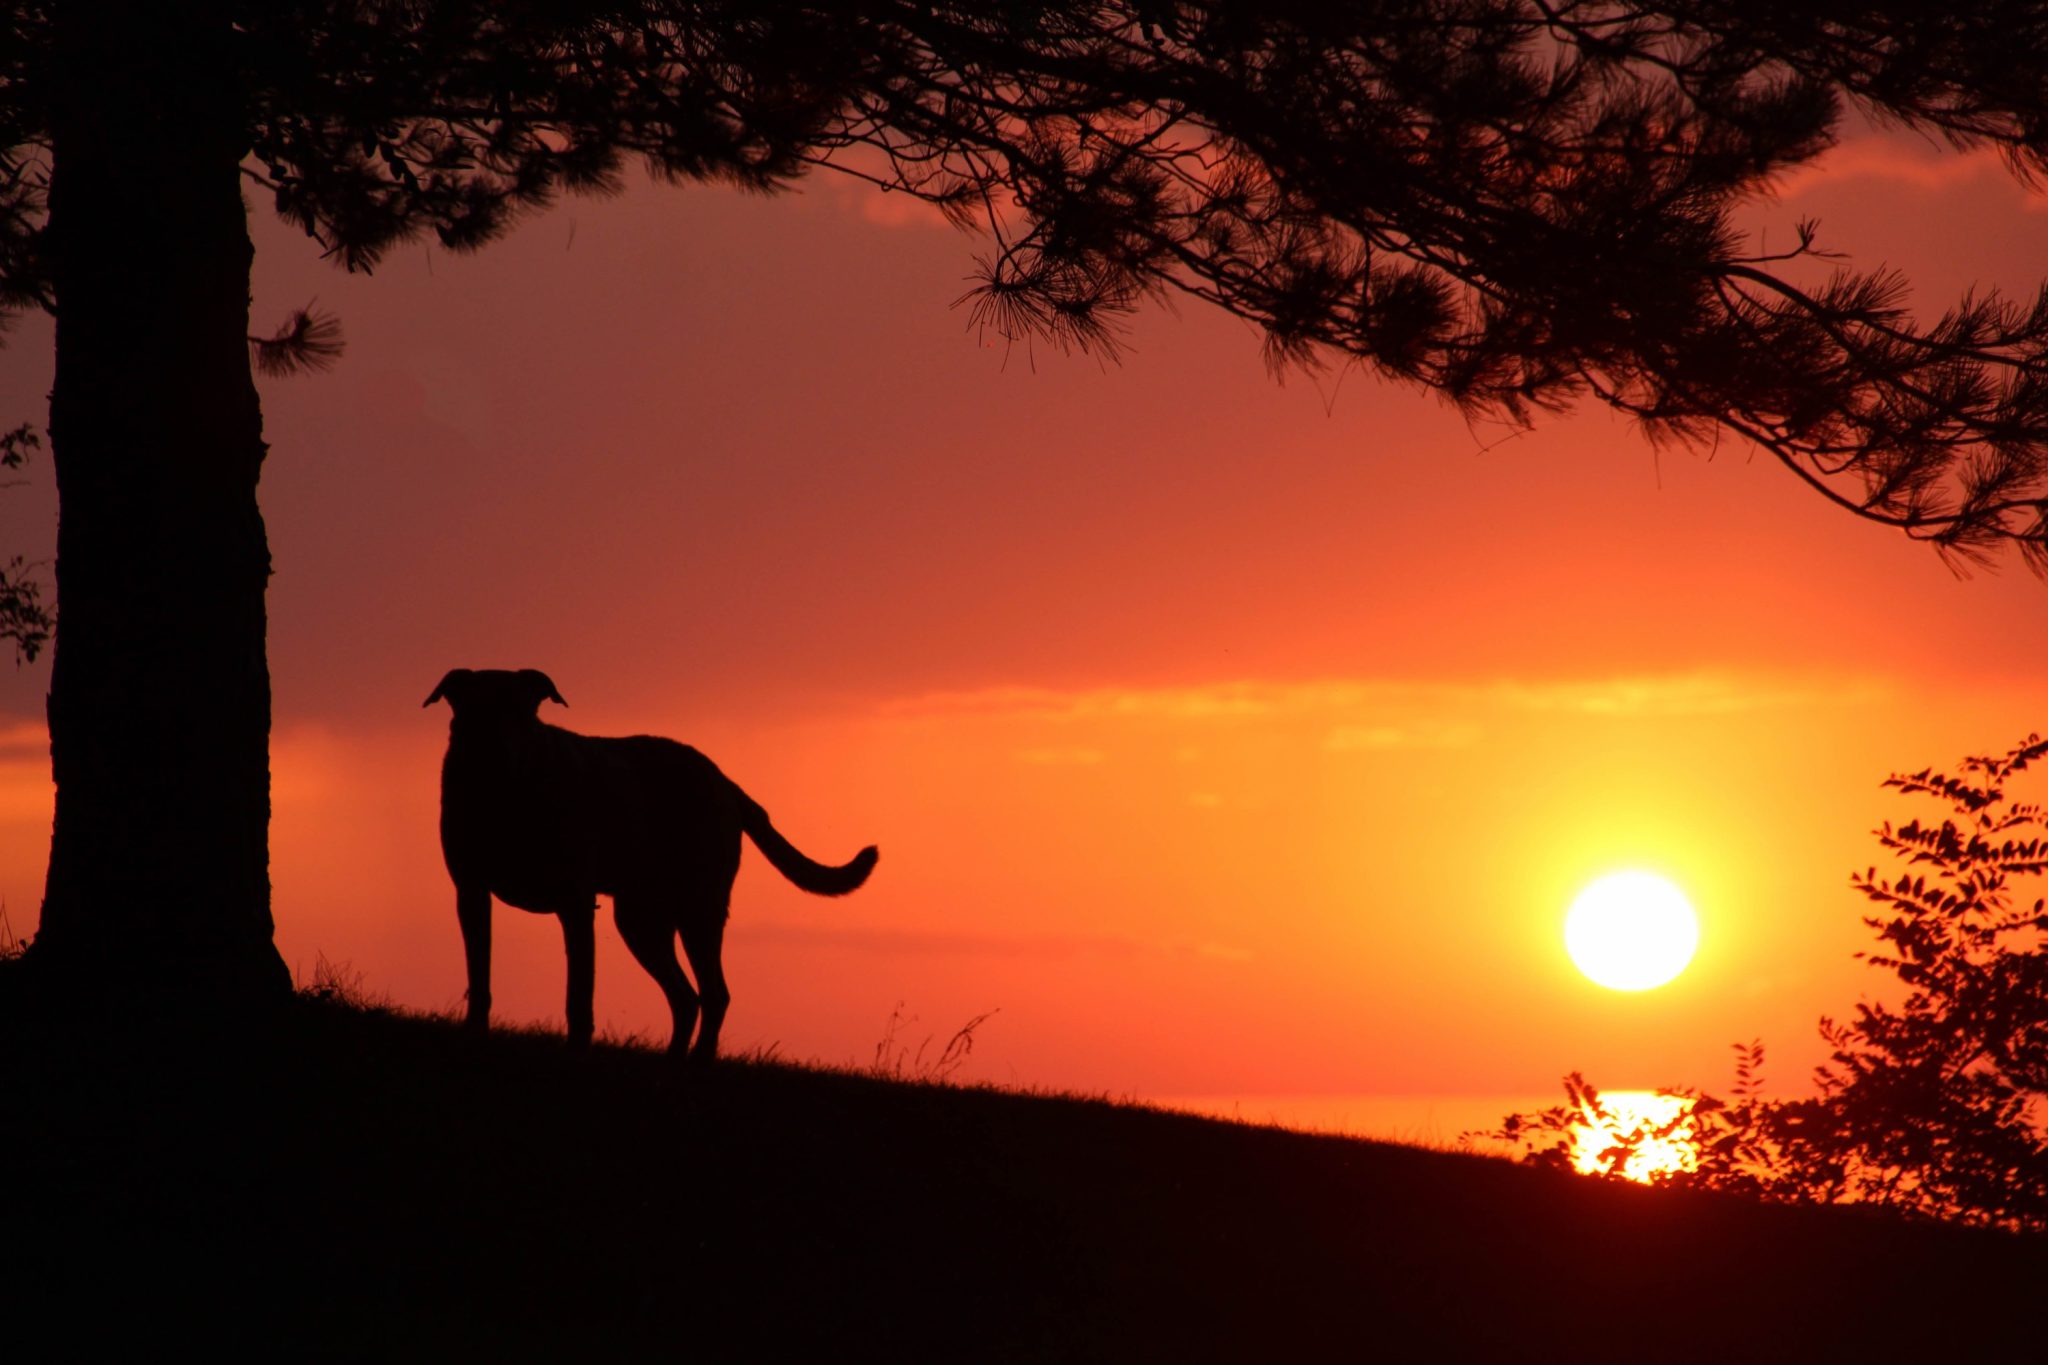 Dog standing by a tree under a red sunset sky.